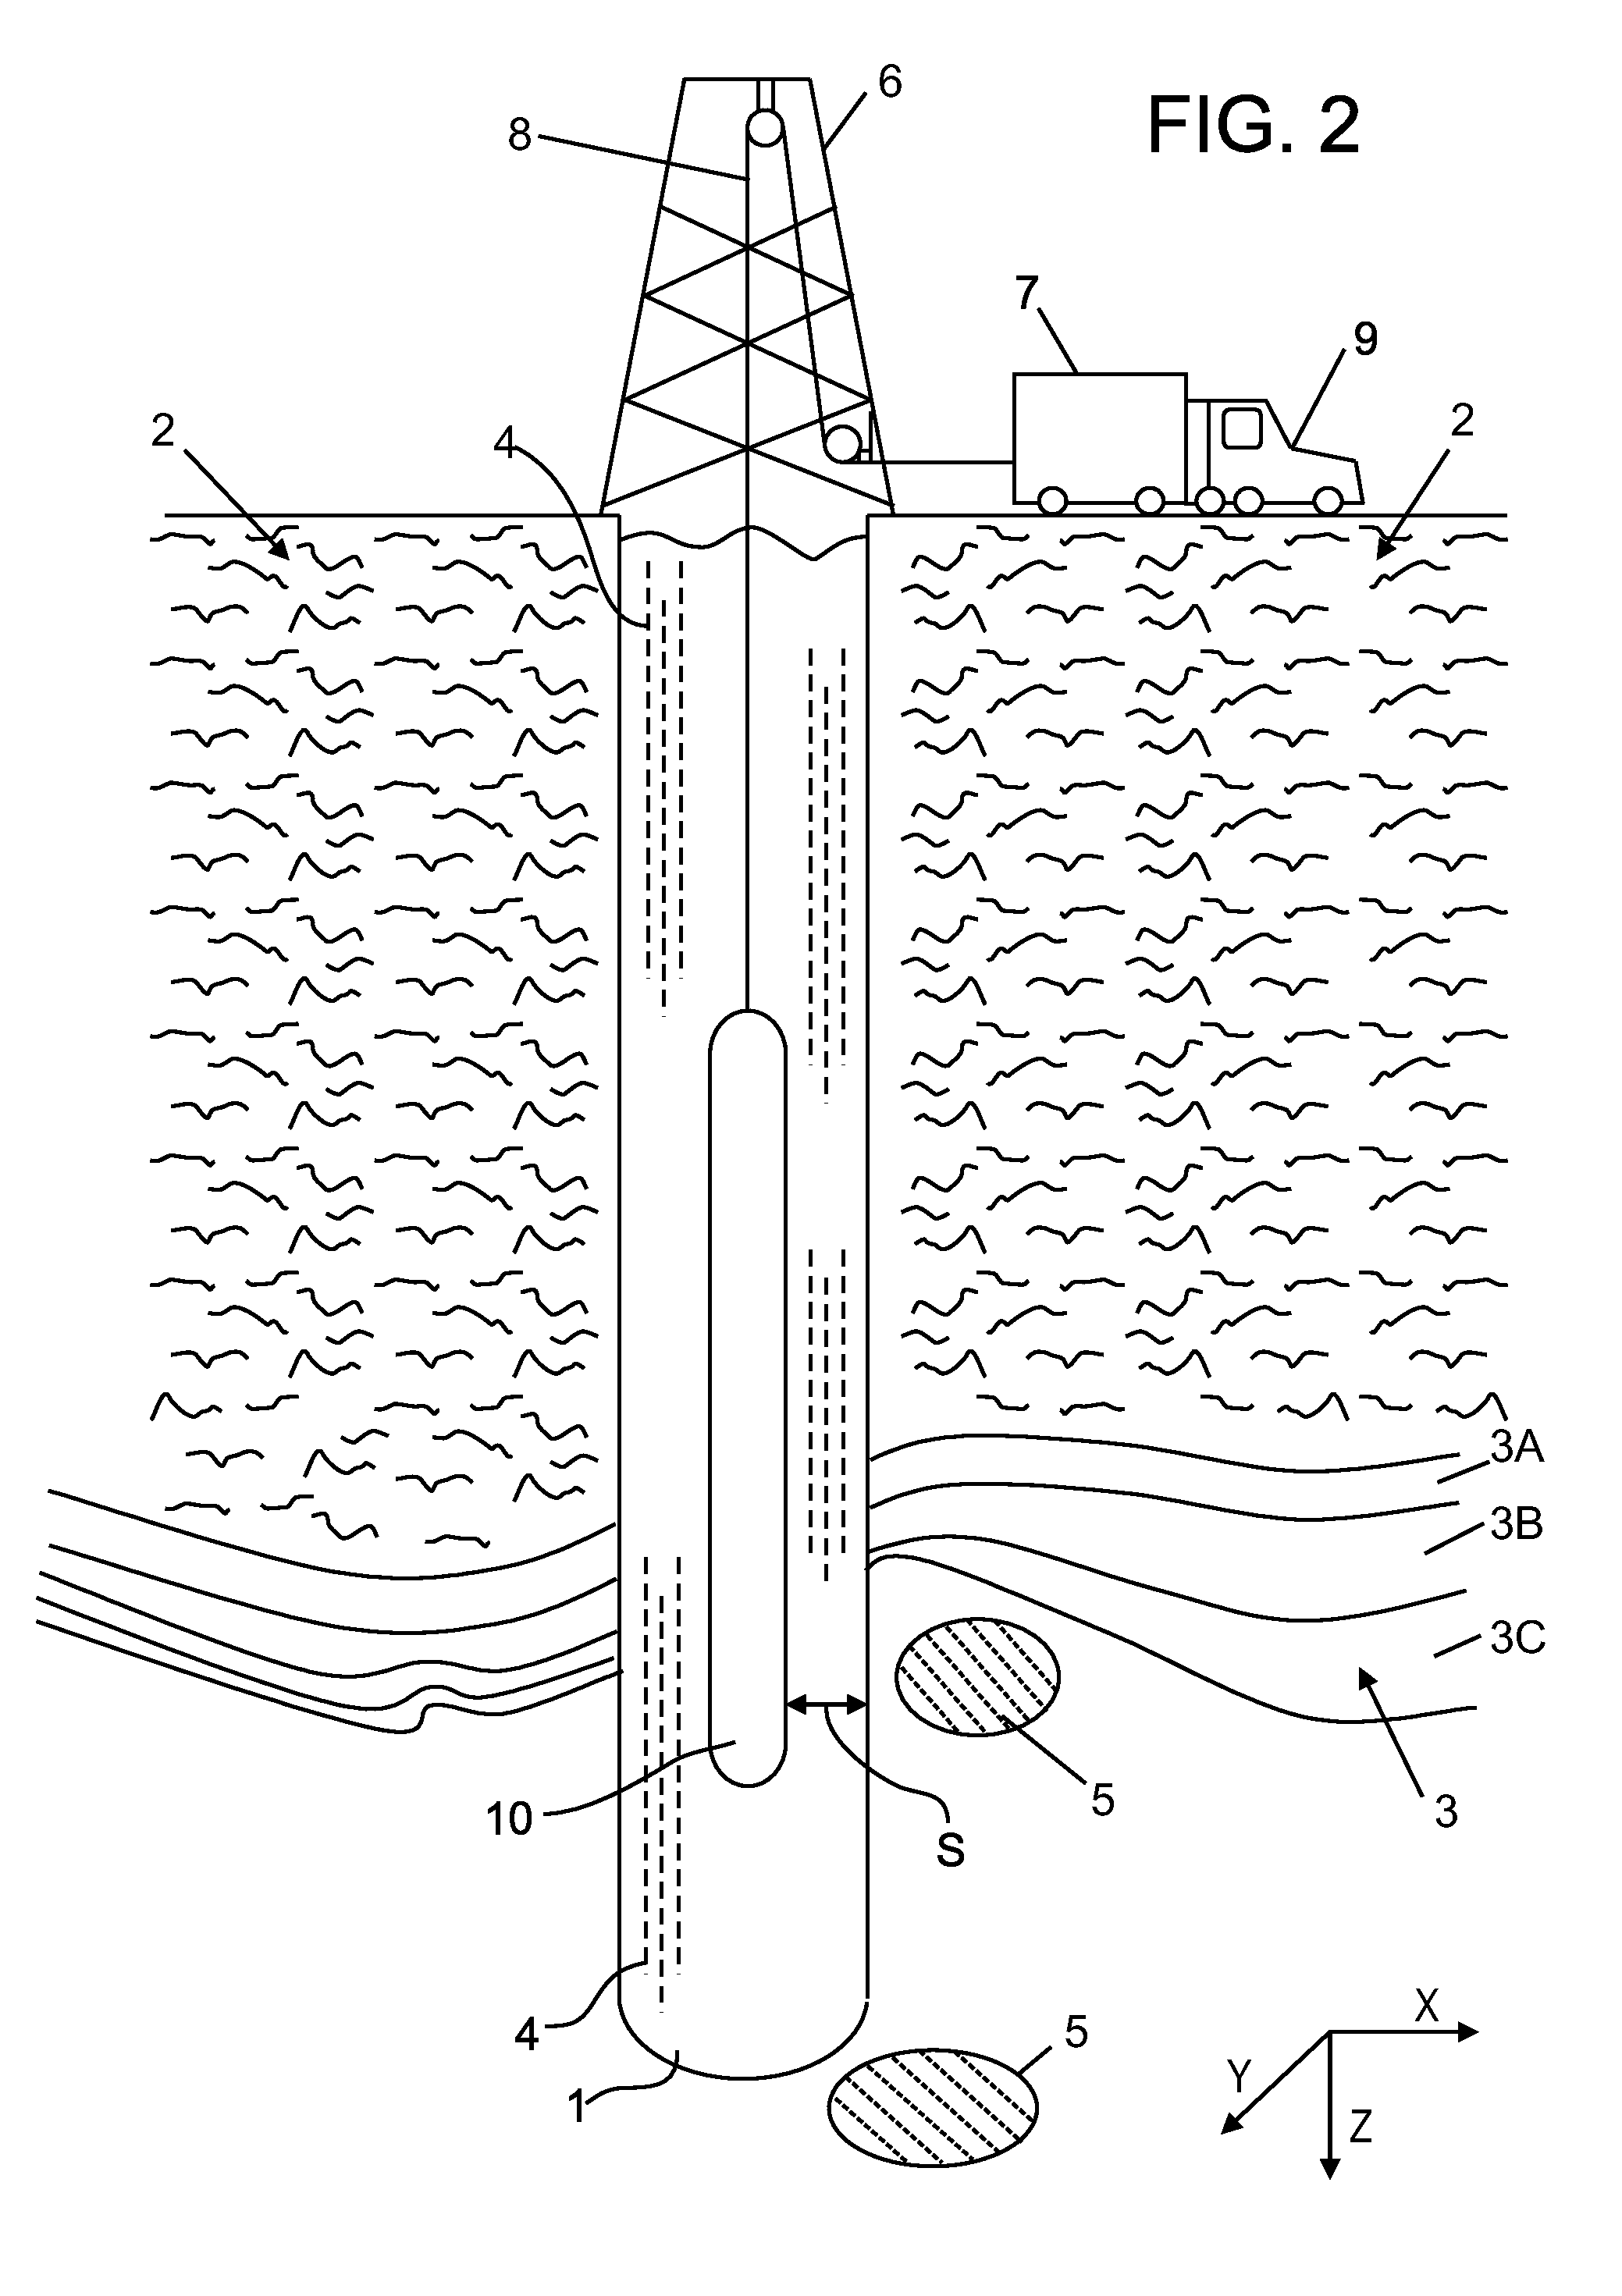 Materials for use as structural neutron moderators in well logging tools